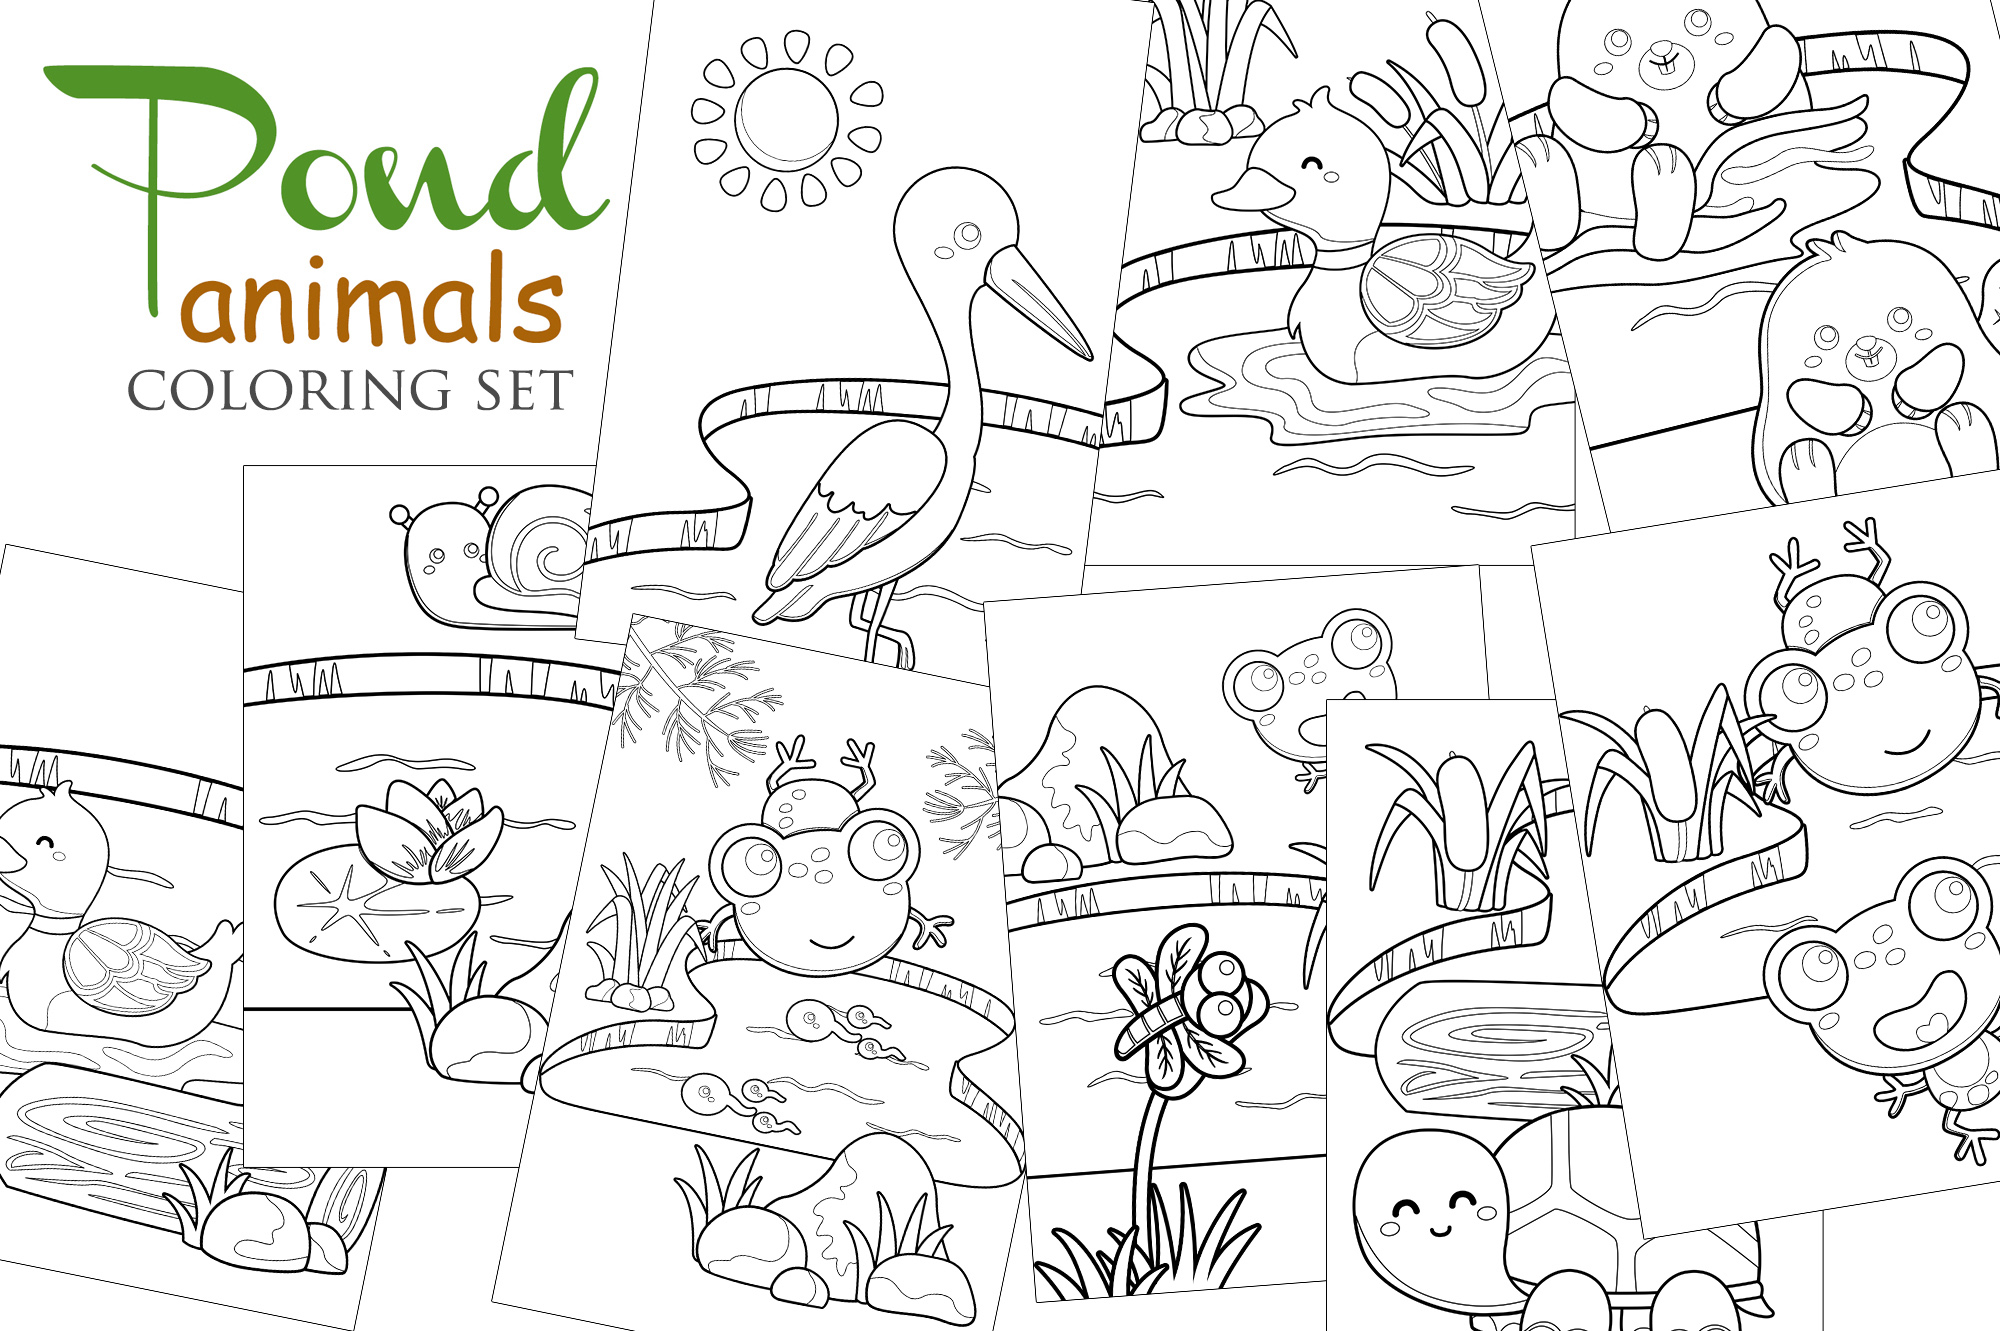 Set of coloring pages with animals and plants.